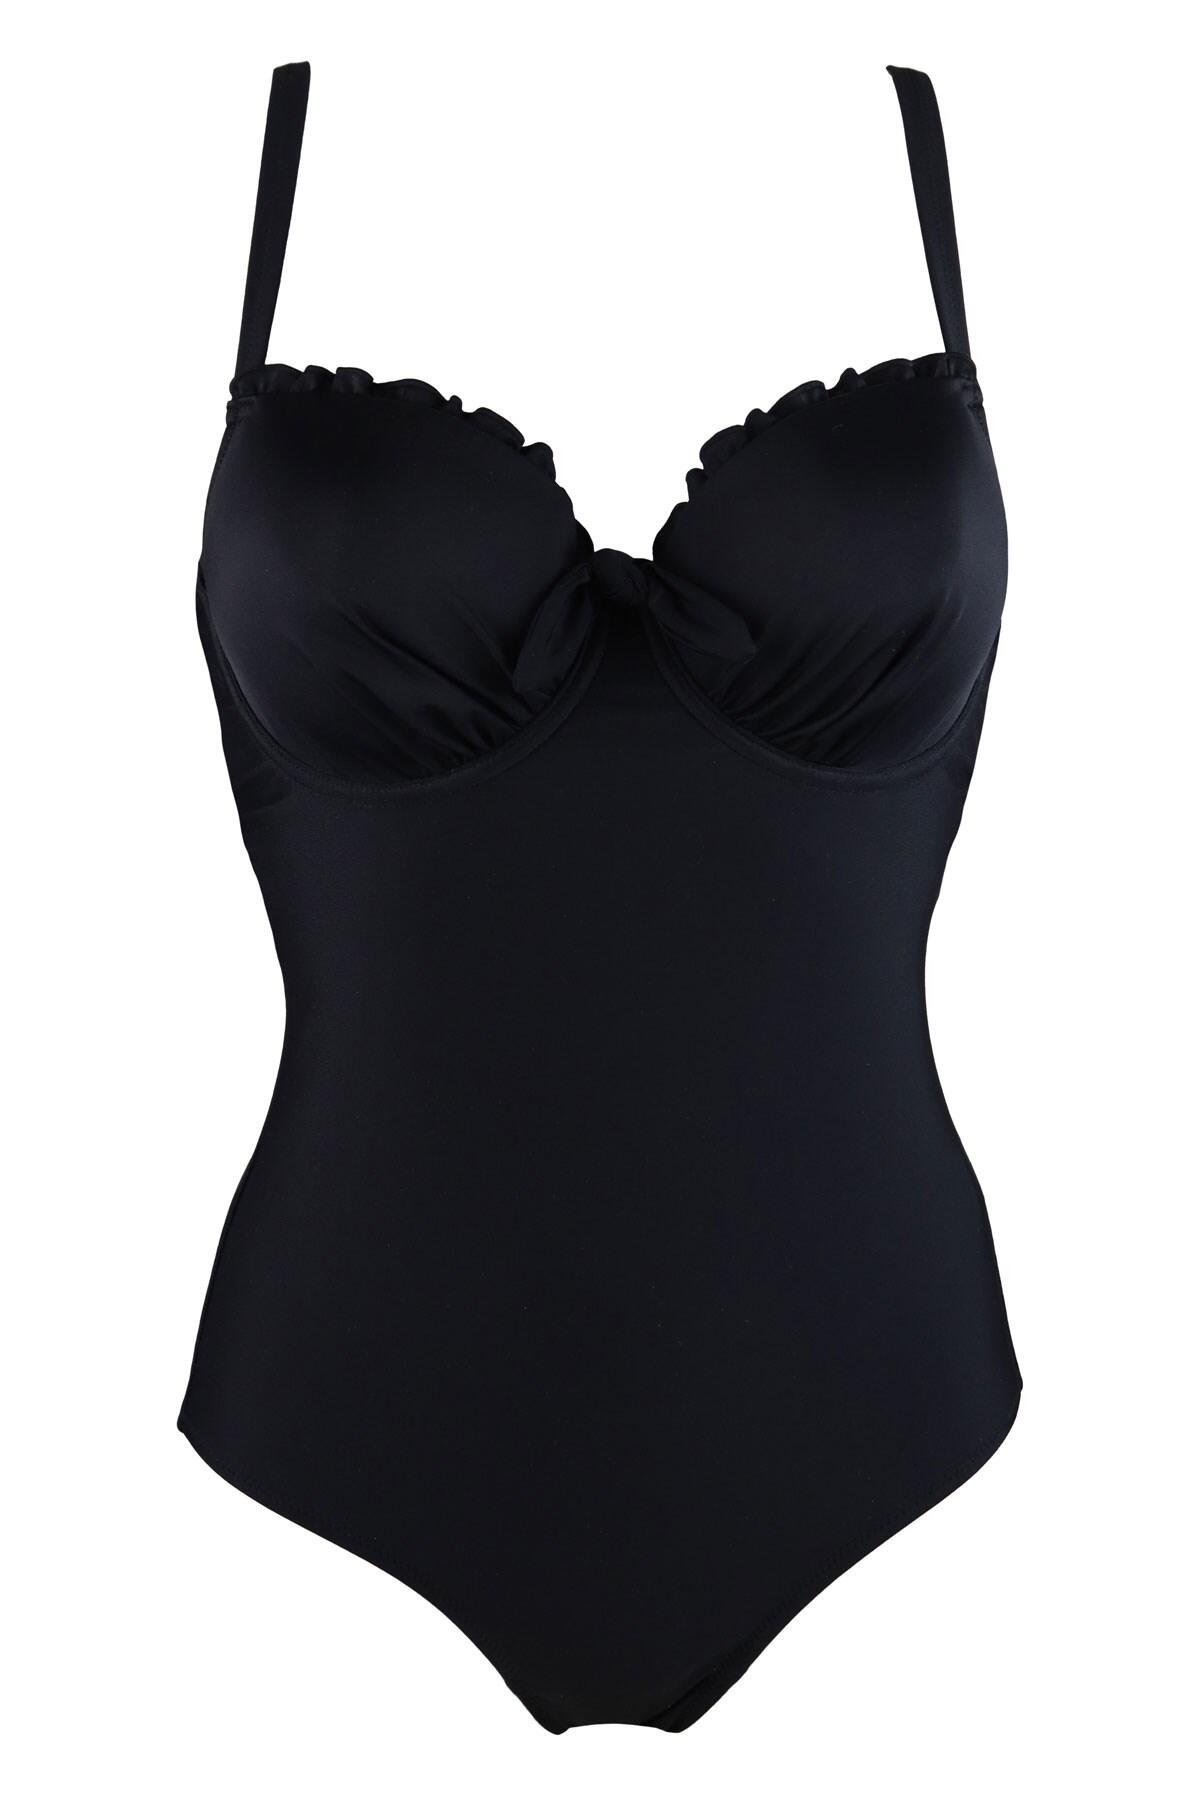 Splash Padded Underwired Control Swimsuit | Black | Pour Moi